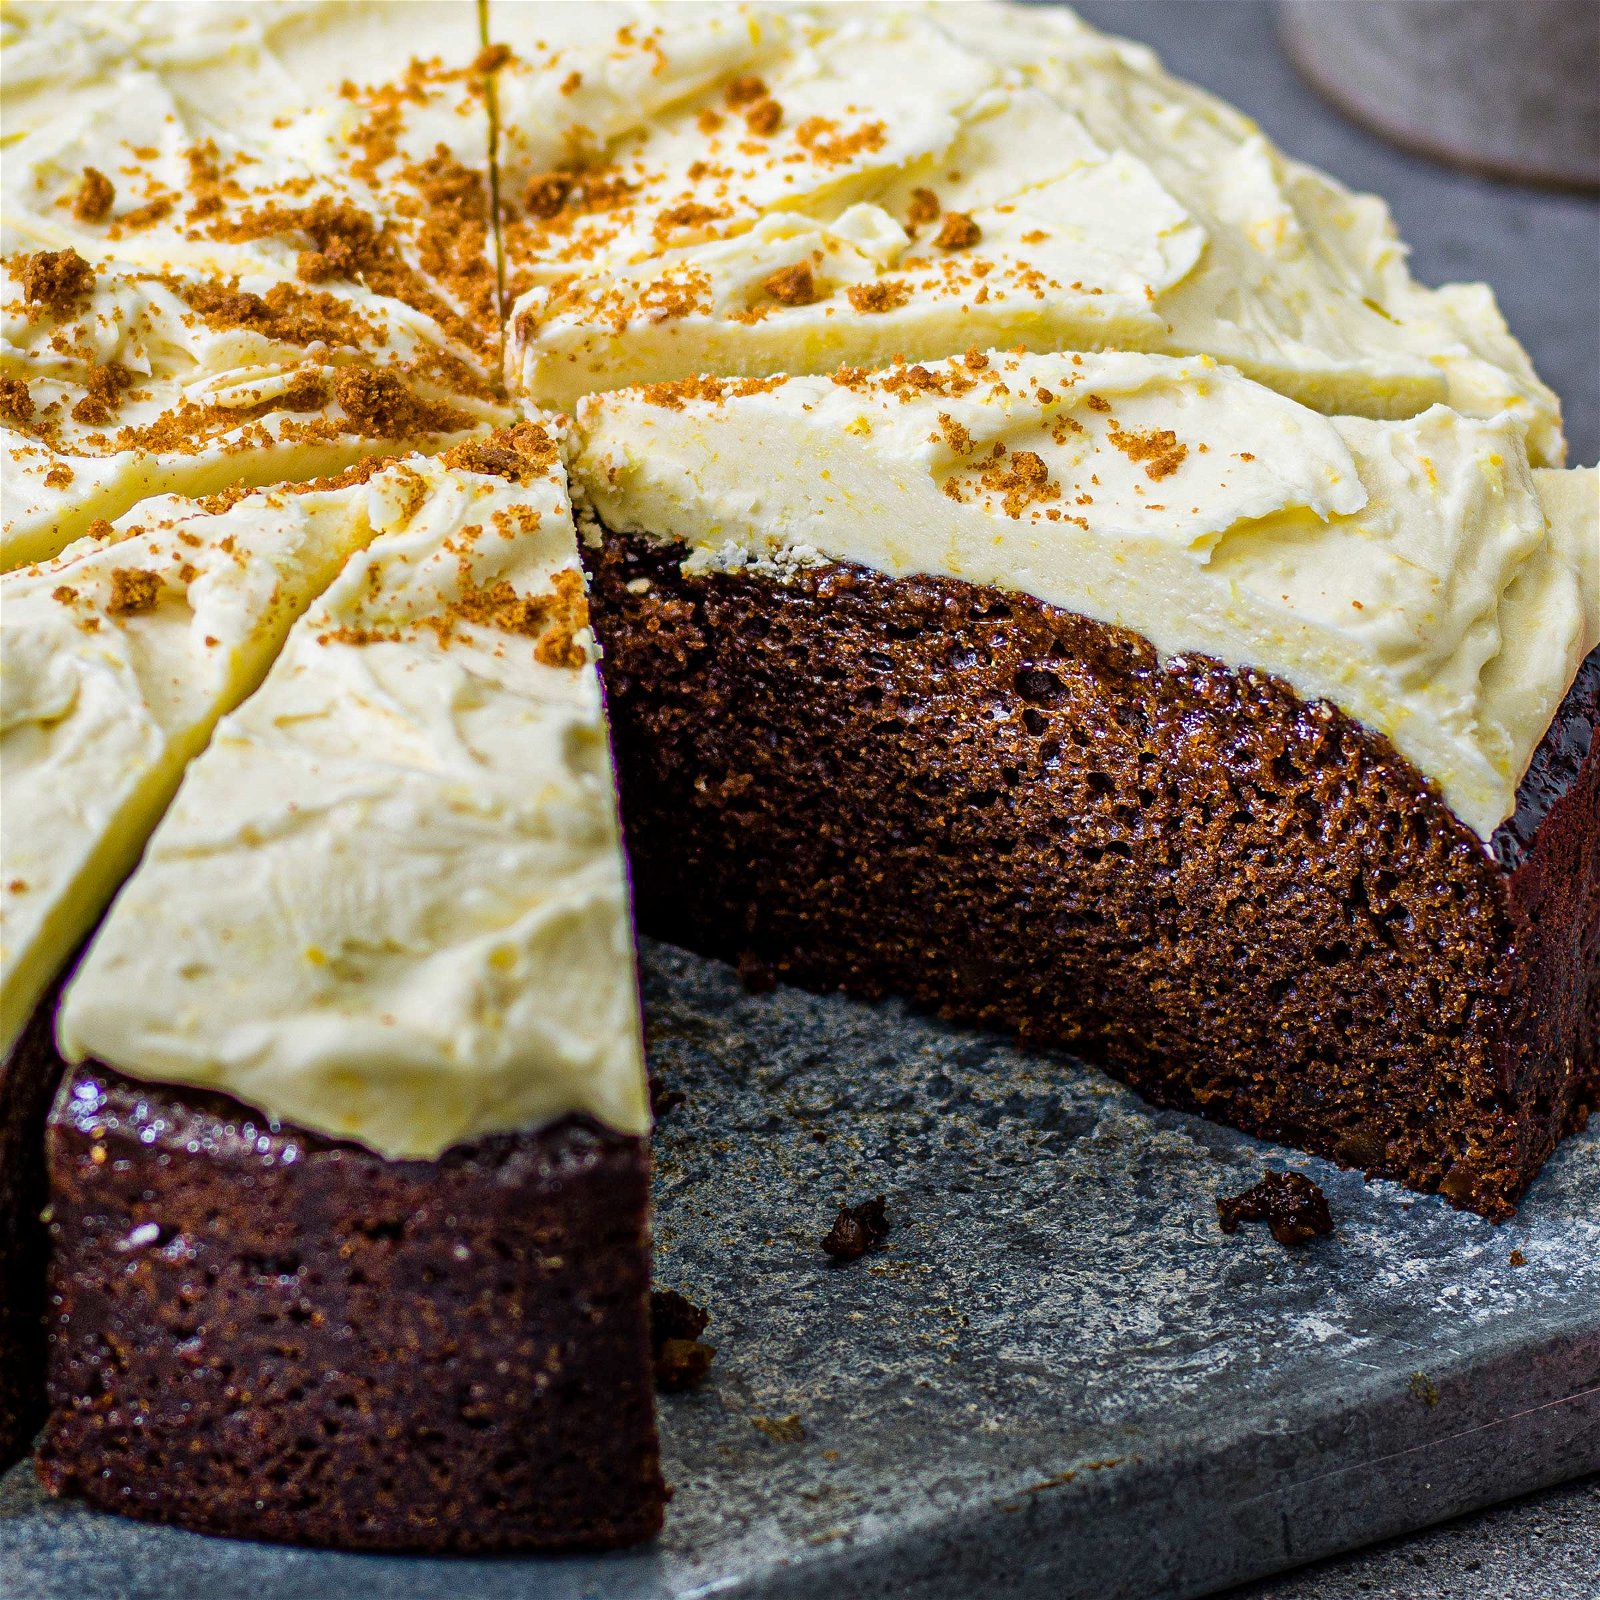 Ginger & white chocolate cake - BBC Good Food Middle East